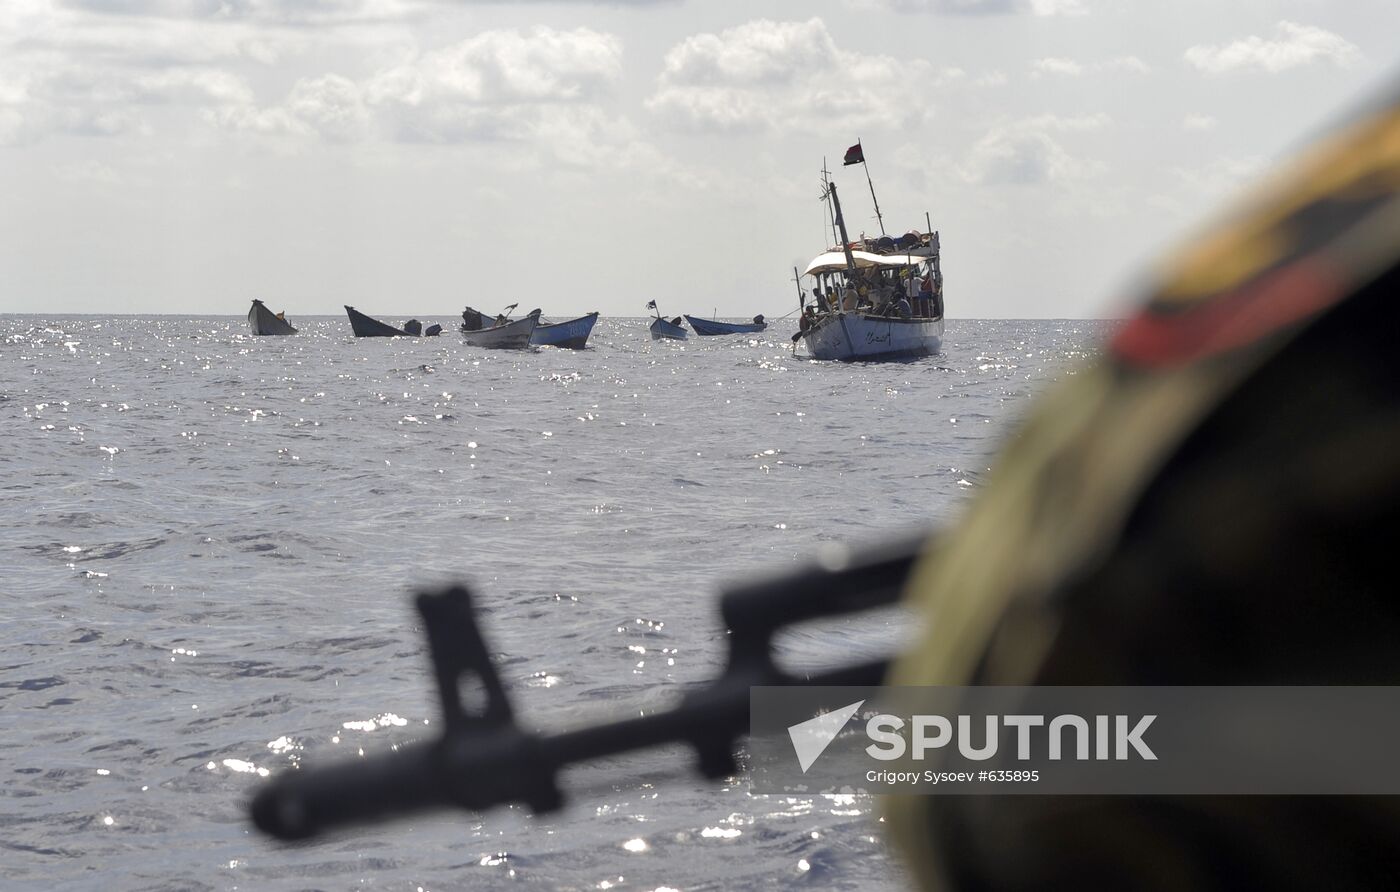 Vessel suspected of piracy spotted in Gulf of Aden